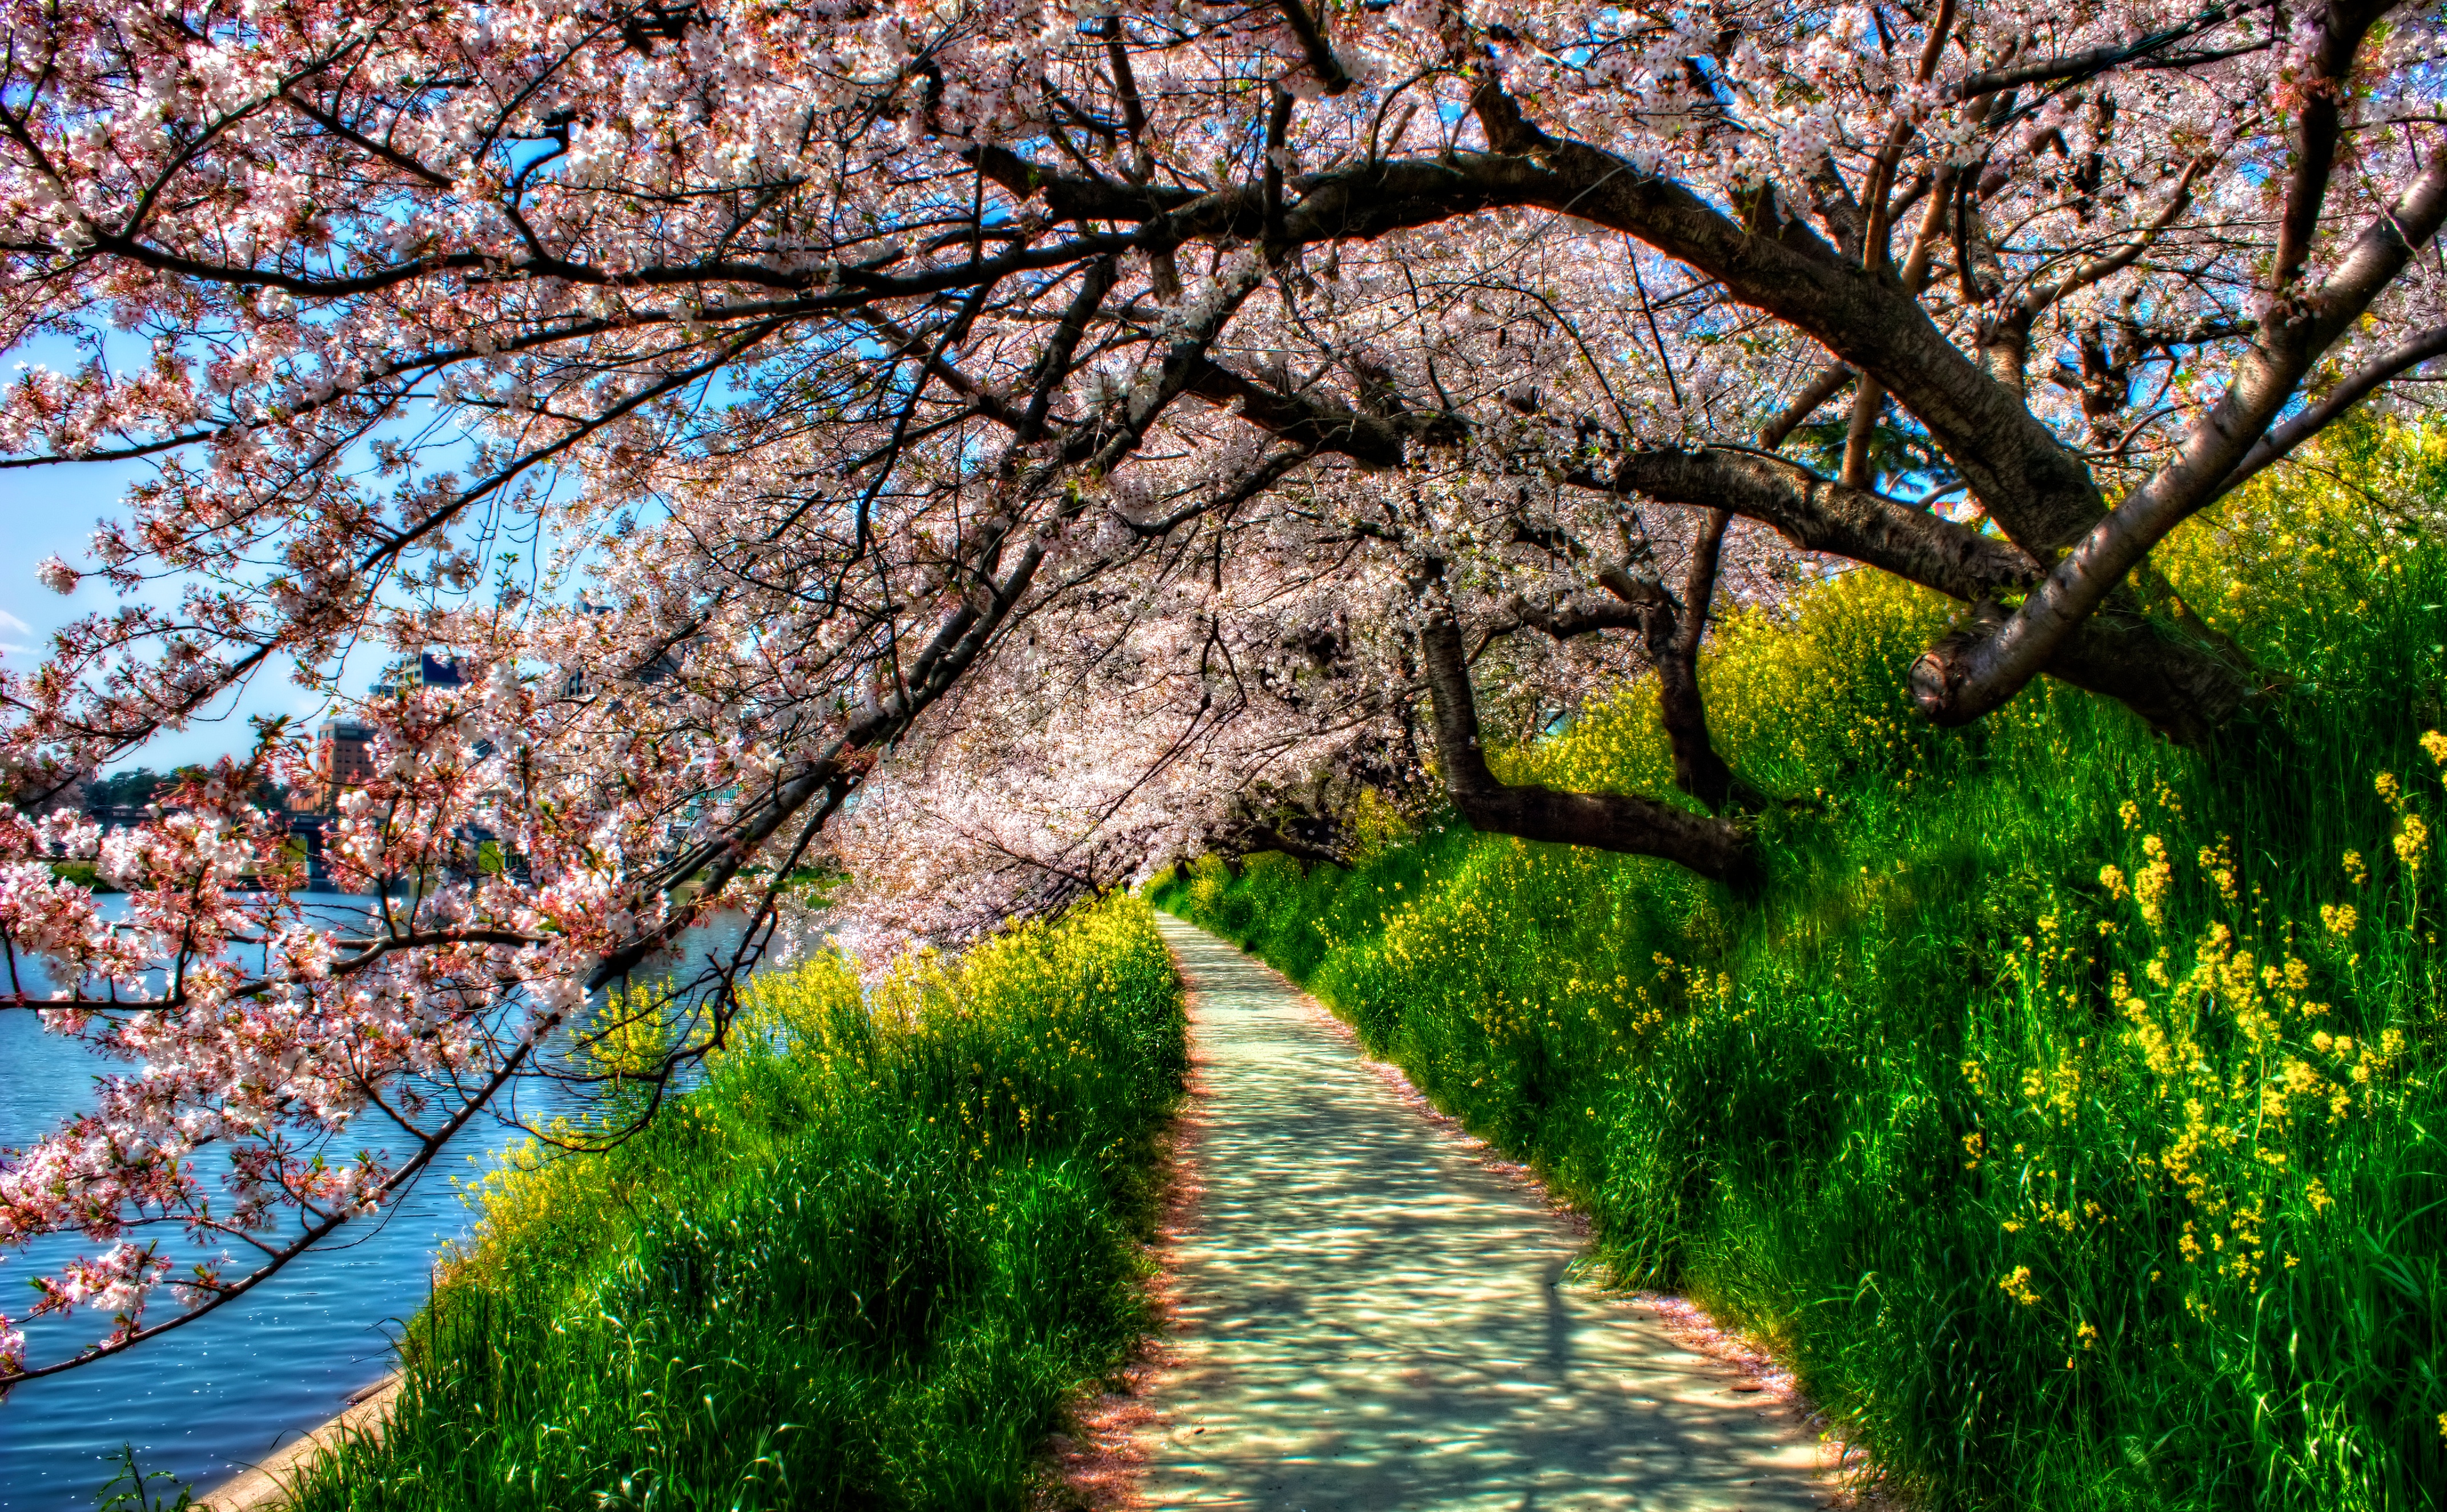 Grass, Tree, Path, Blossom, Spring, Park, River, HDR, Earth Gallery HD Wallpaper